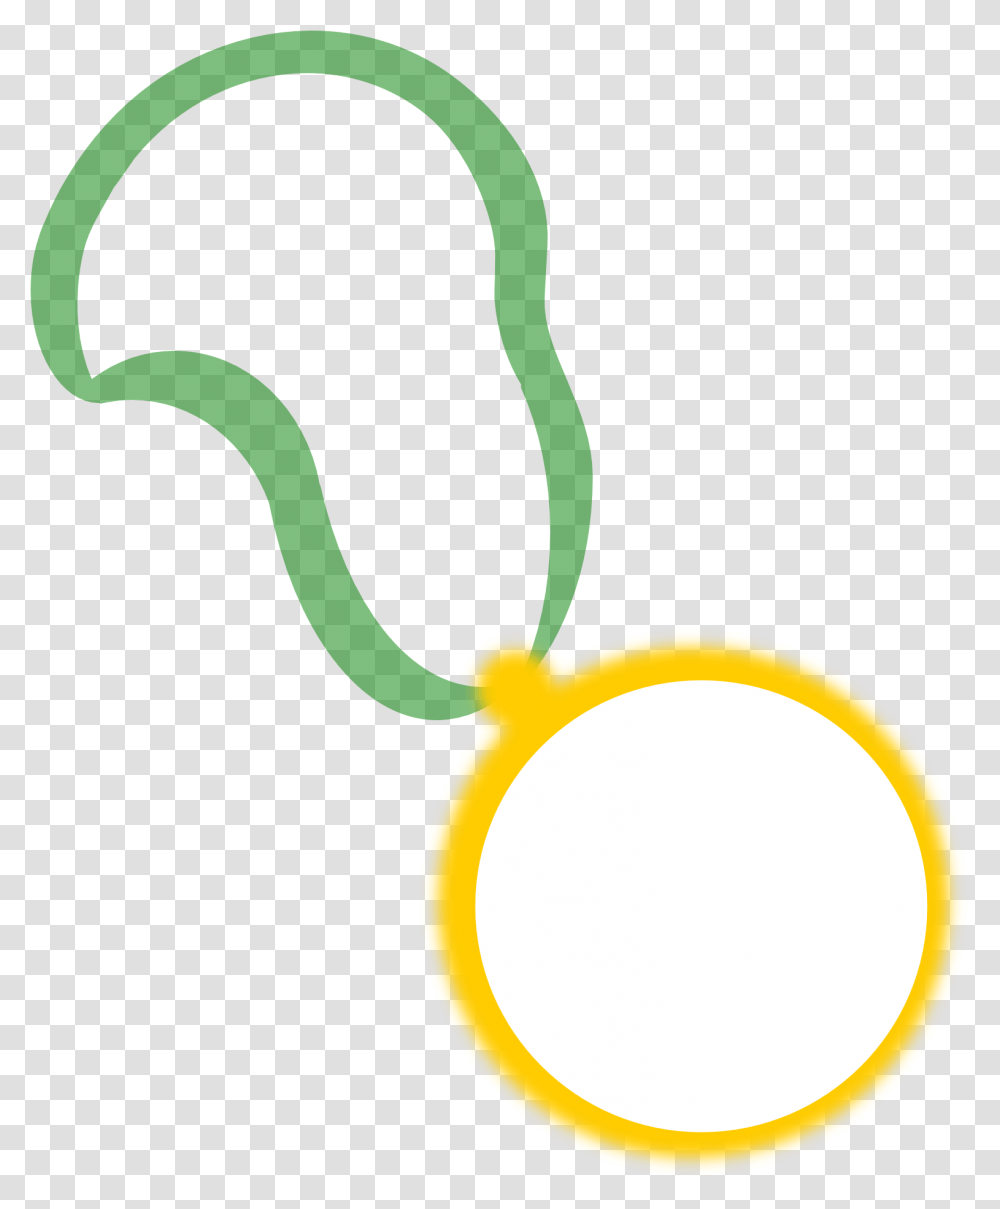 Gold Medal Sports Award Icon Free Image Dot, Plant, Tree, Food, Produce Transparent Png